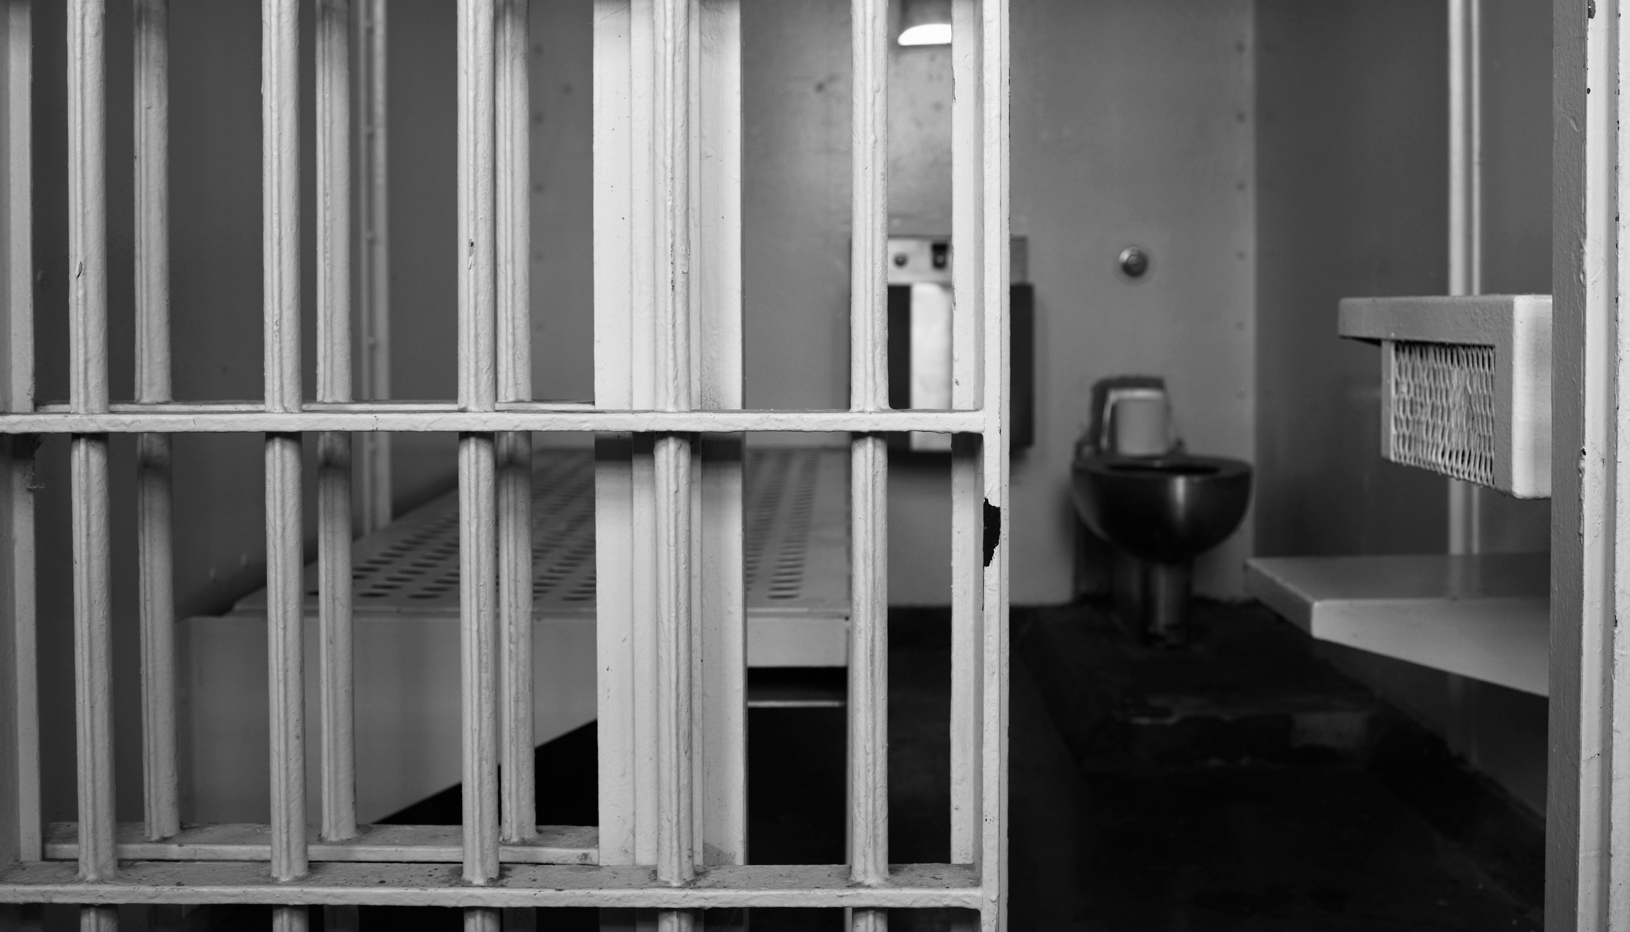 Black and white image of jail cell